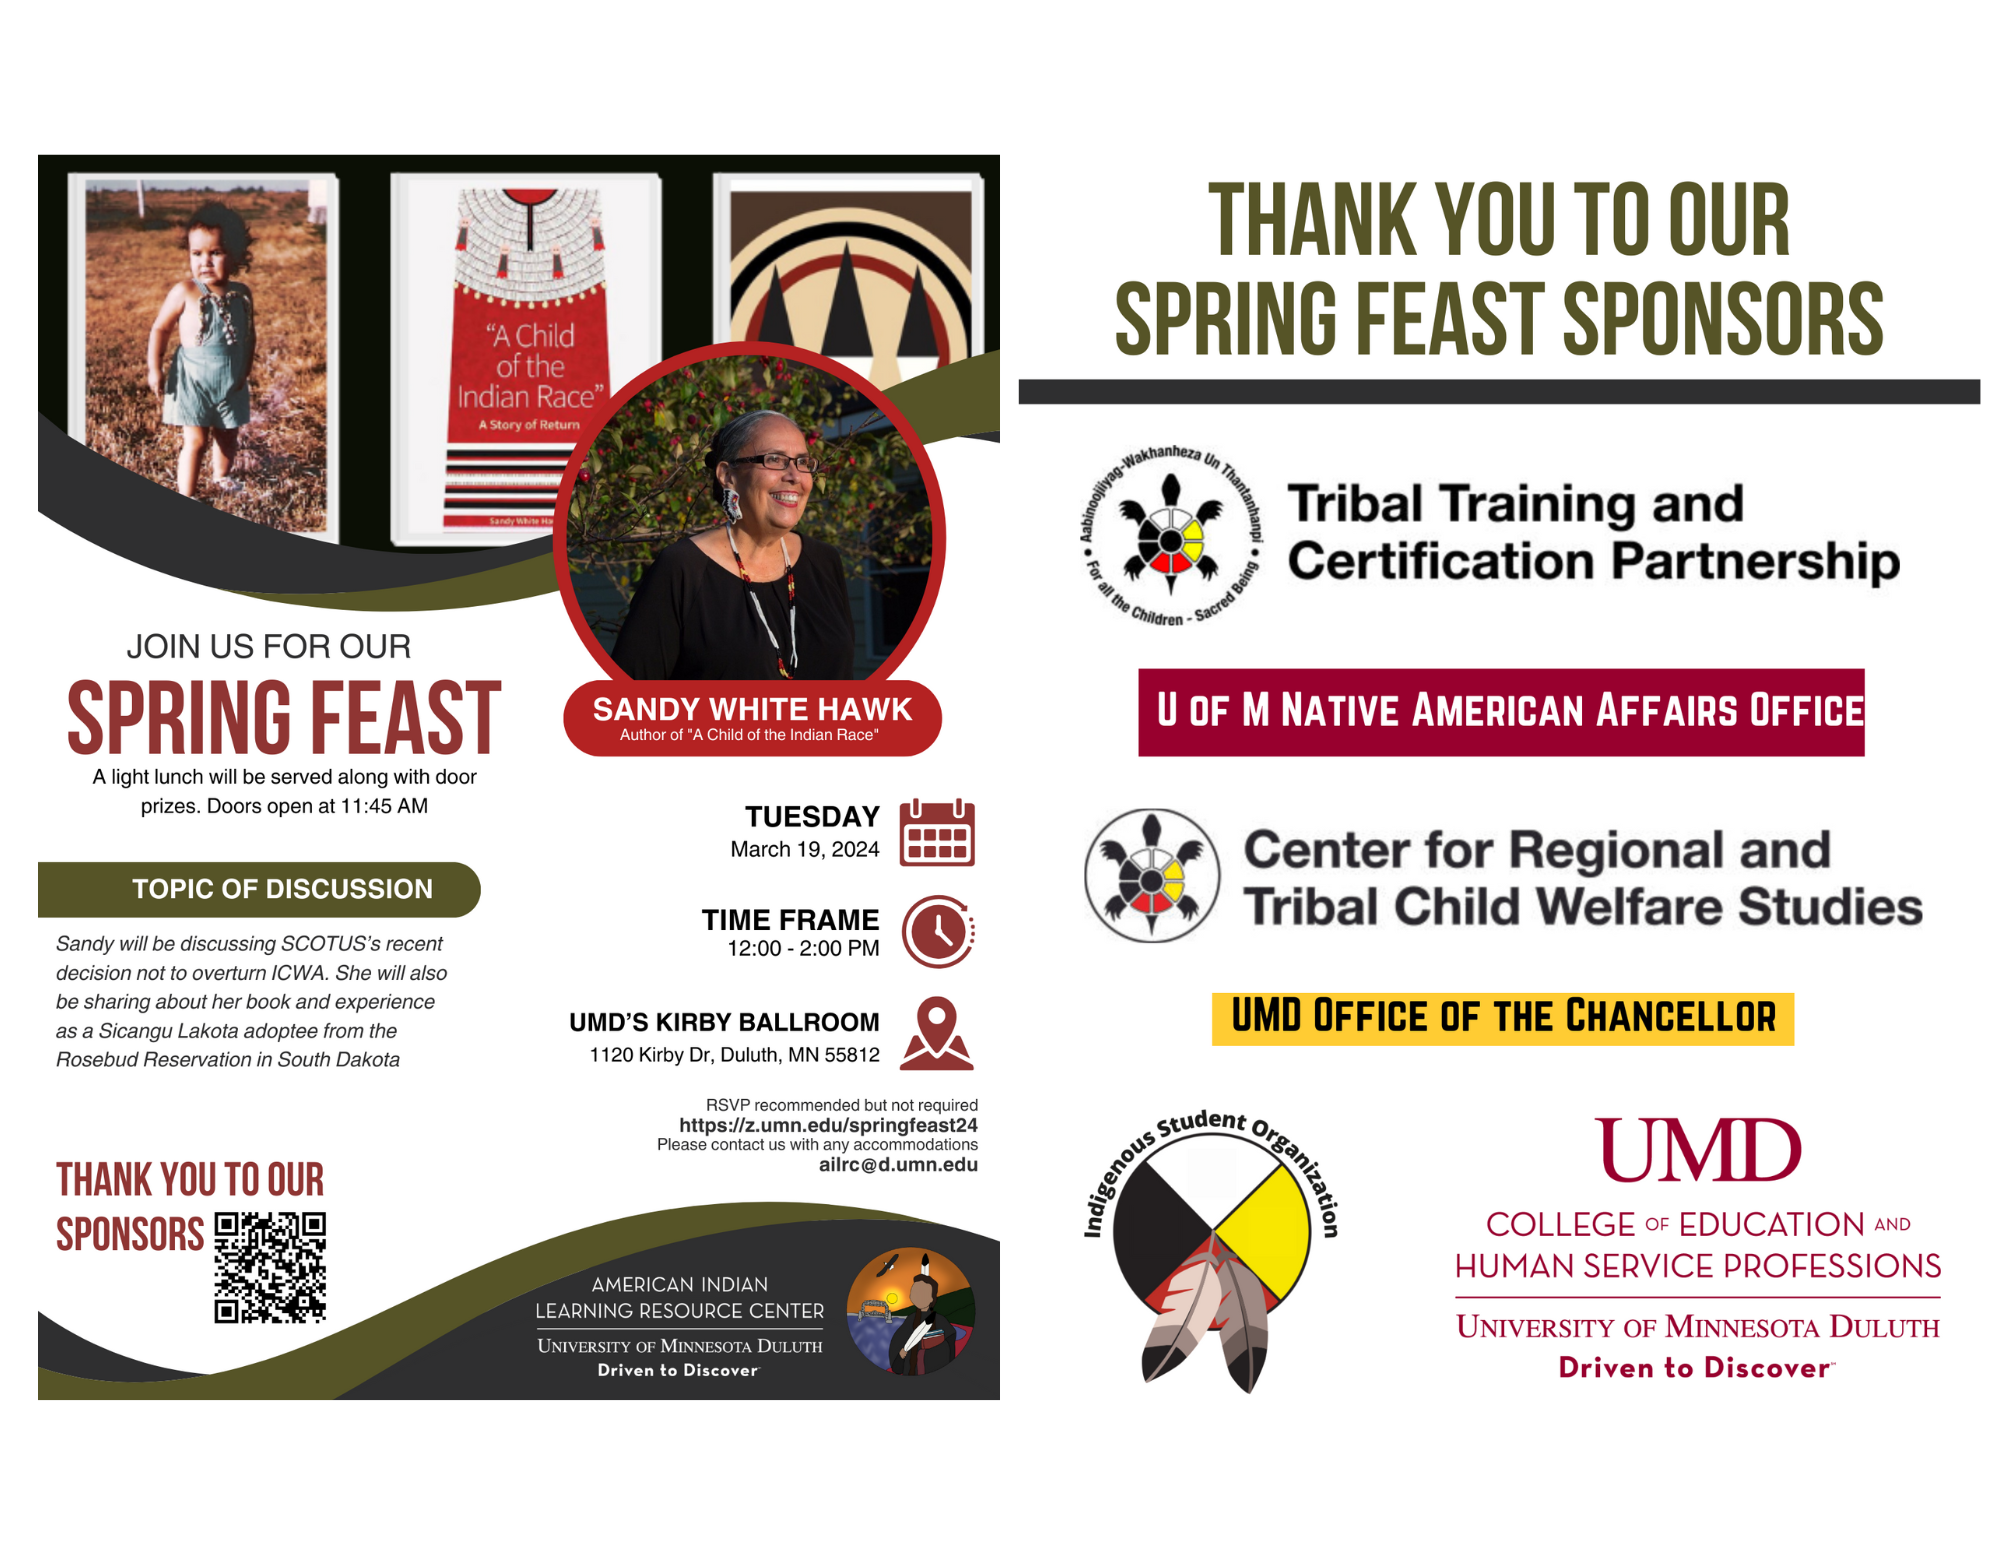 AILRC Spring Feast promotional flyer. Event is on March 19, 2024 from noon to 2 p.m. and will feature a presentation from Sandy White Hawk about the U.S. Supreme Court's decision to not overturn the Indian Child Welfare Act.